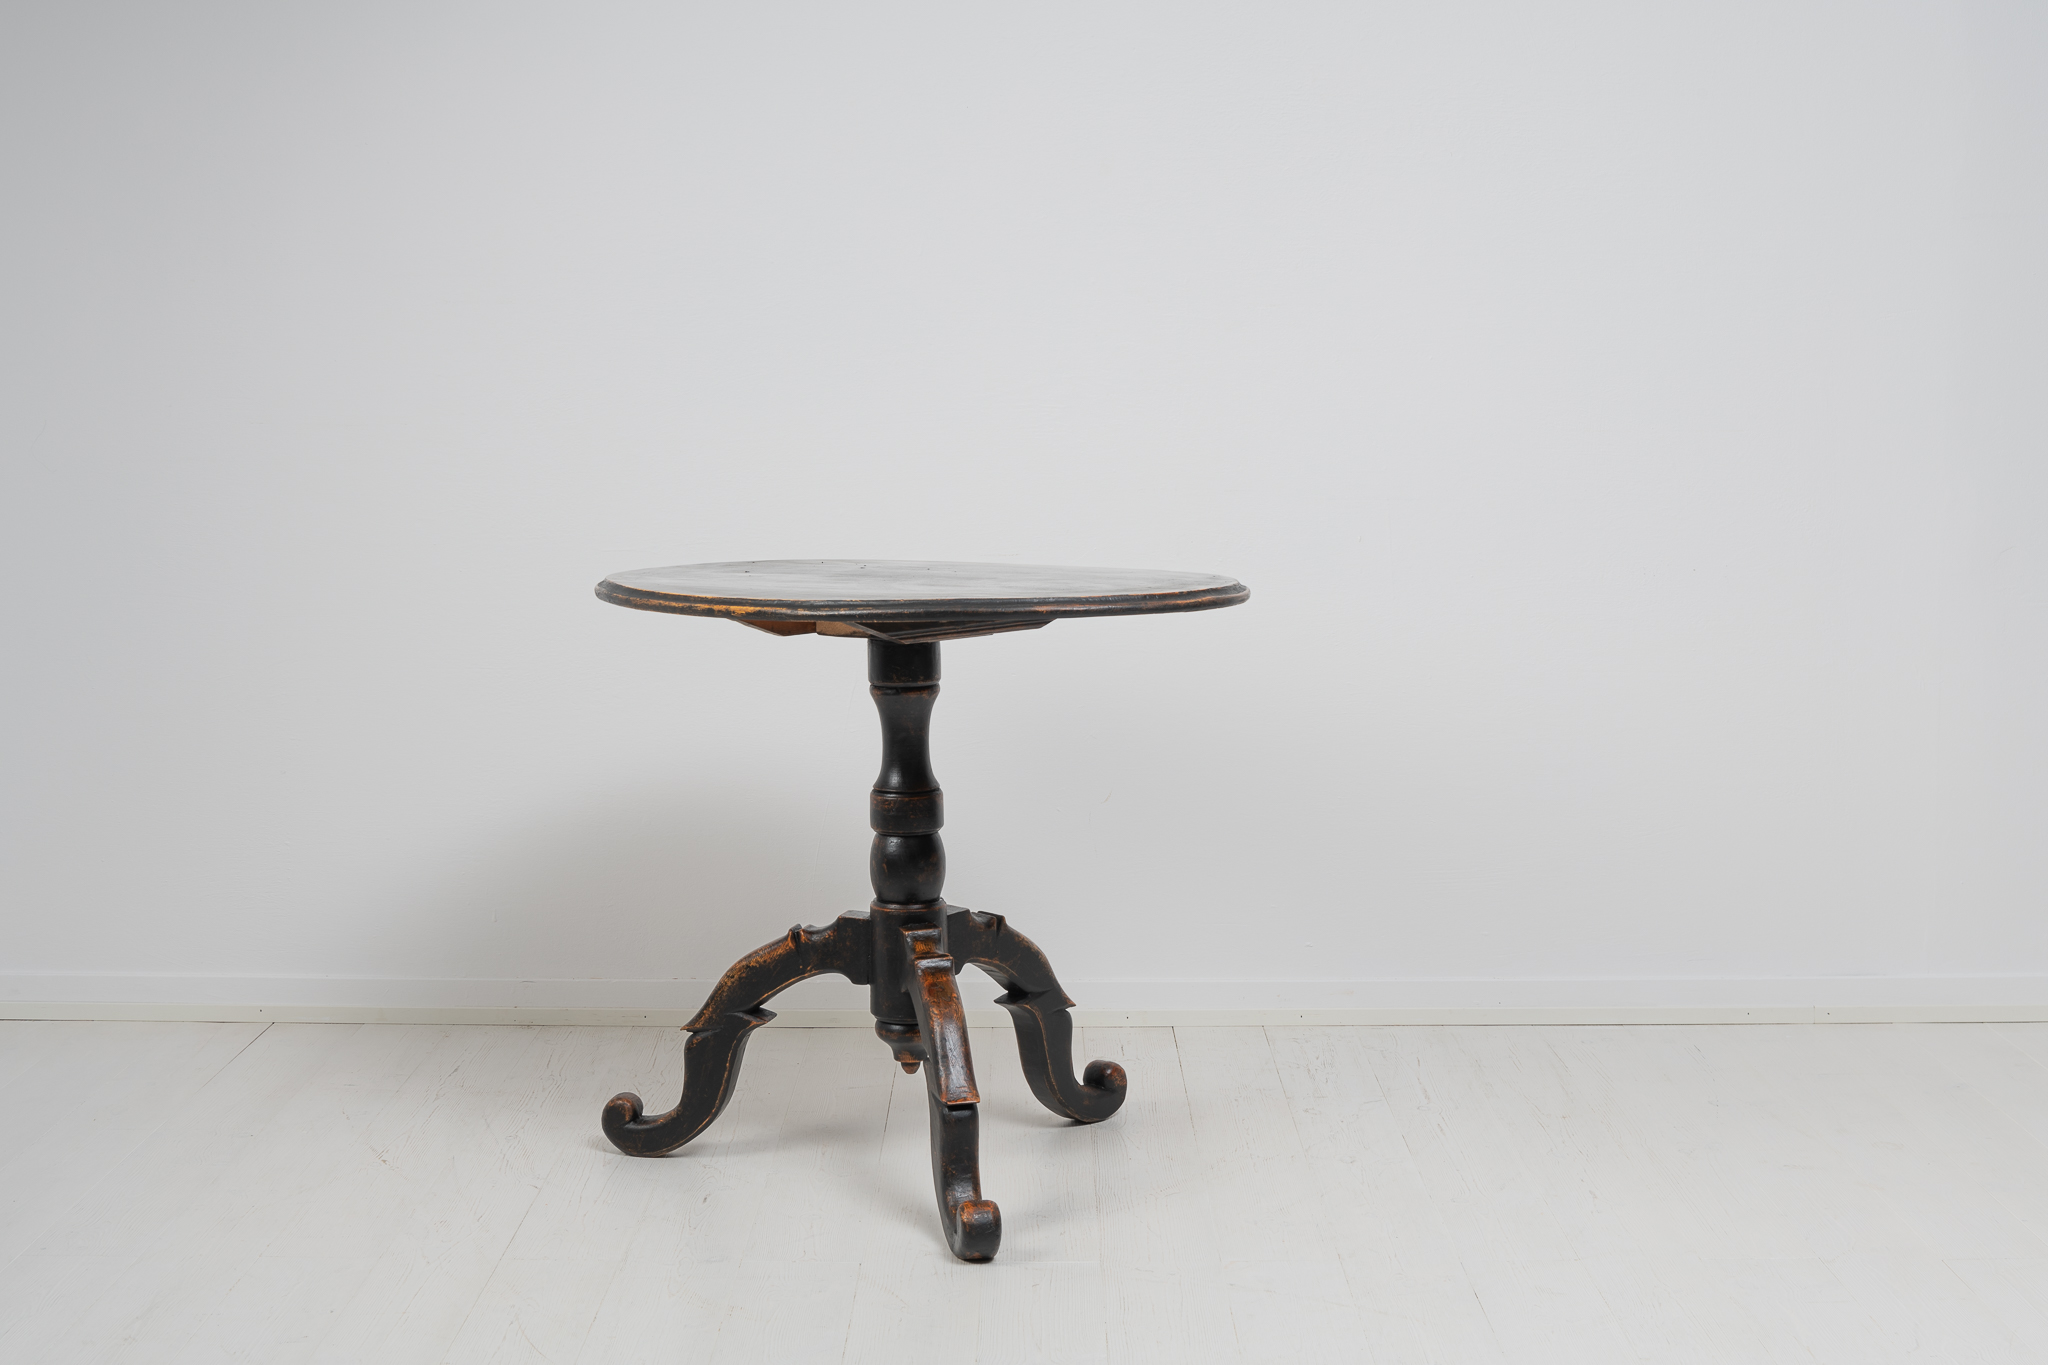 Small black tilt-top table from Sweden made during the mid 19th century, around 1860. The table is painted with black paint that has become distressed